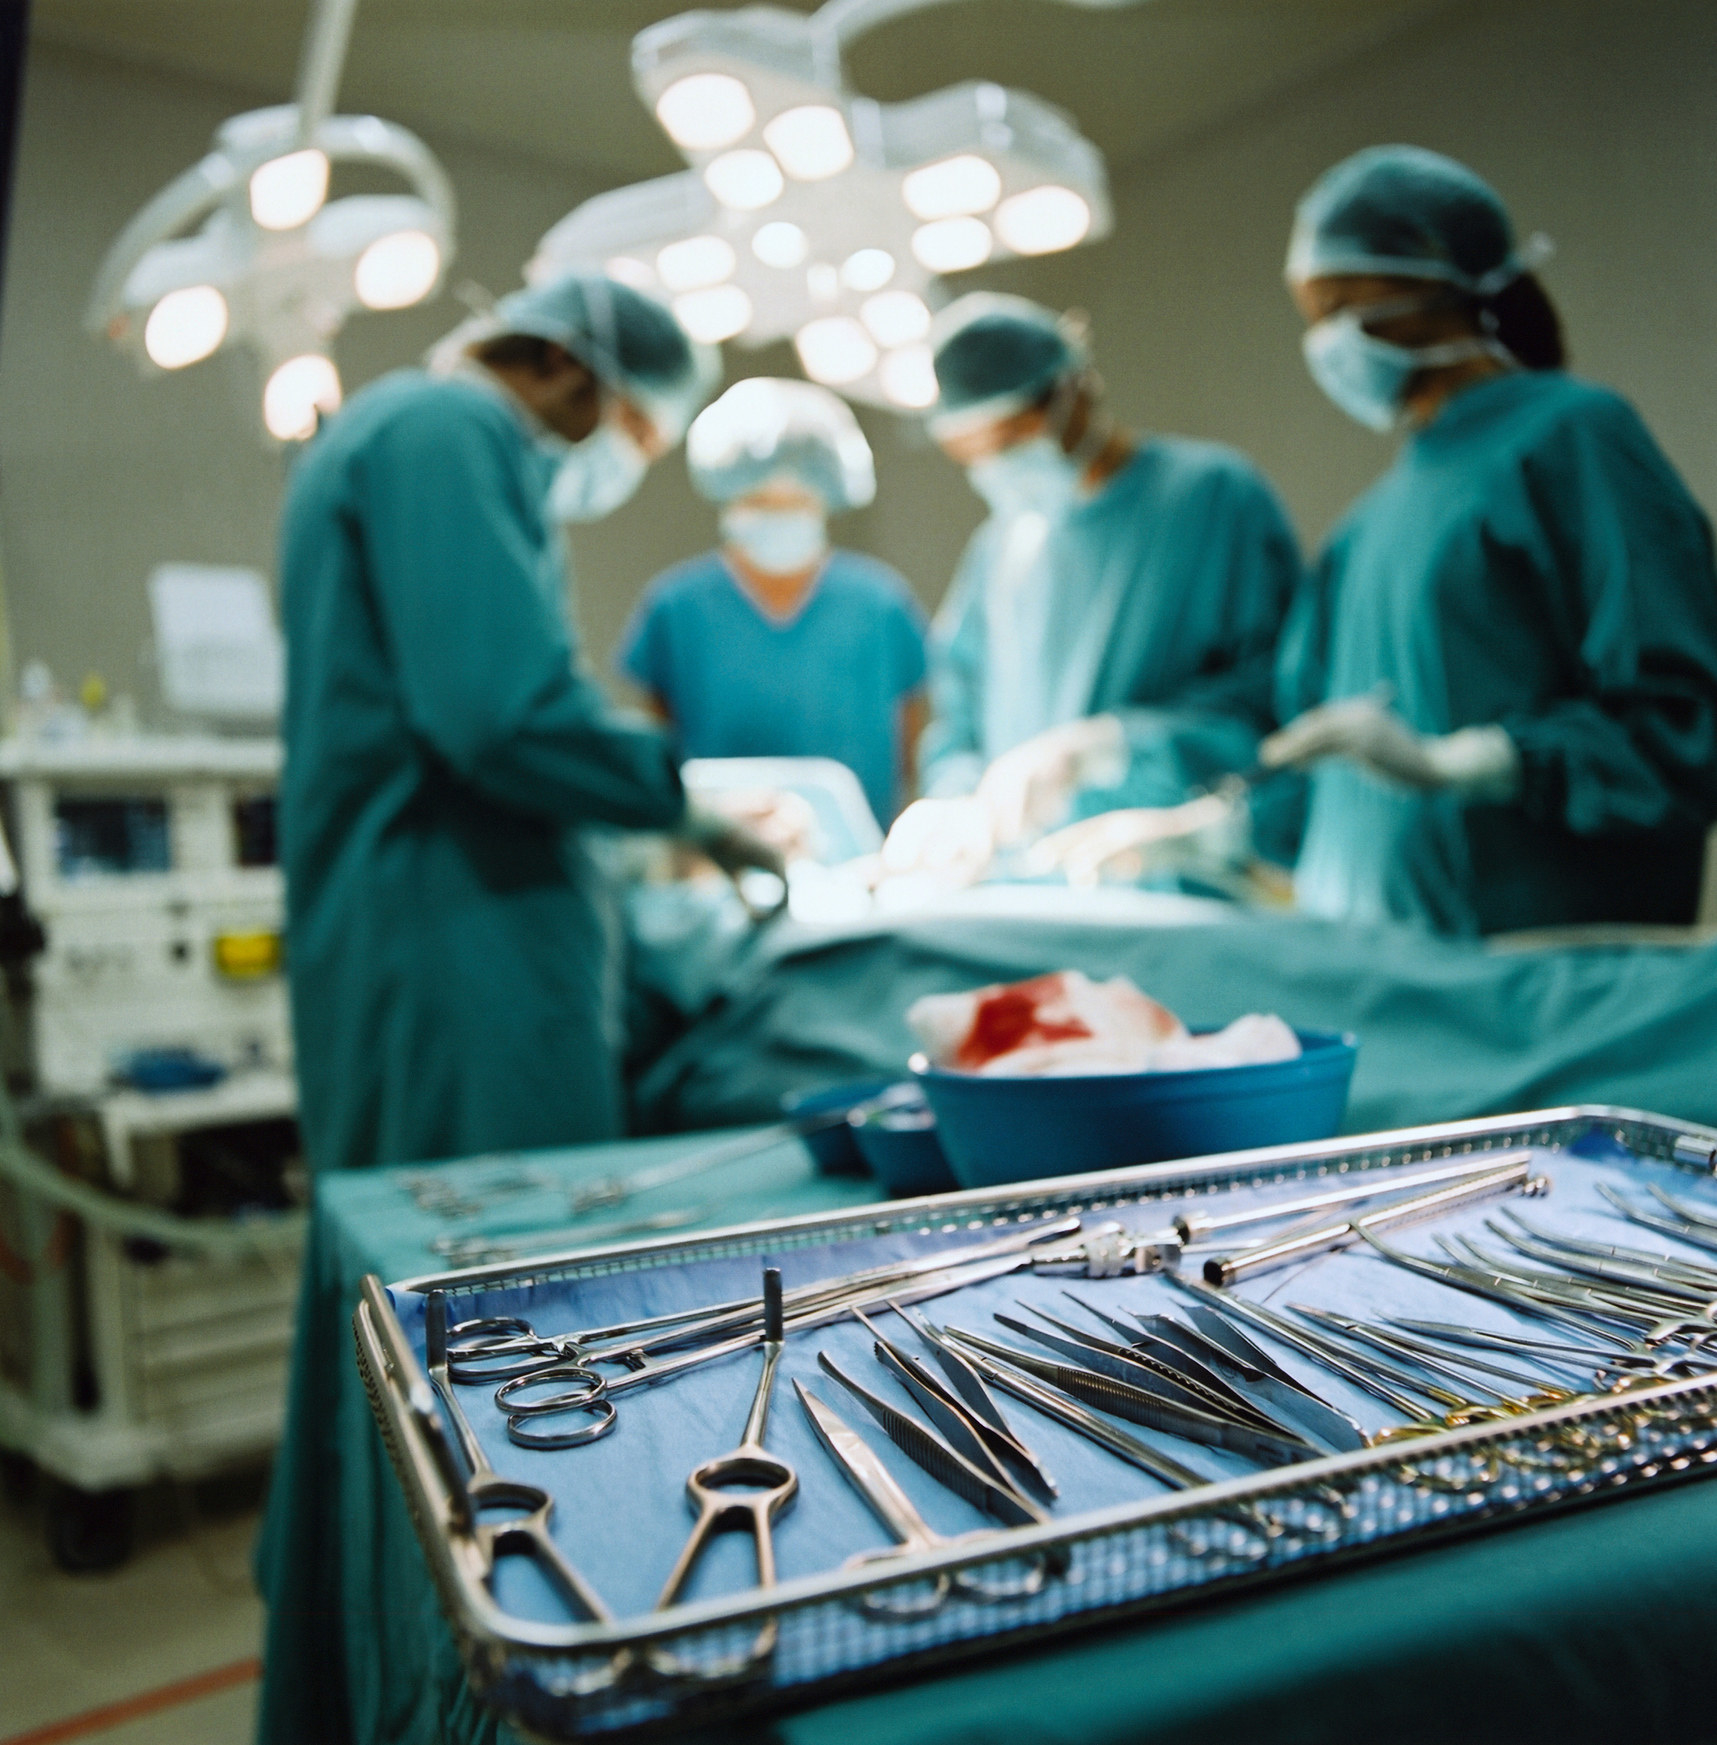 Tools in a operating room